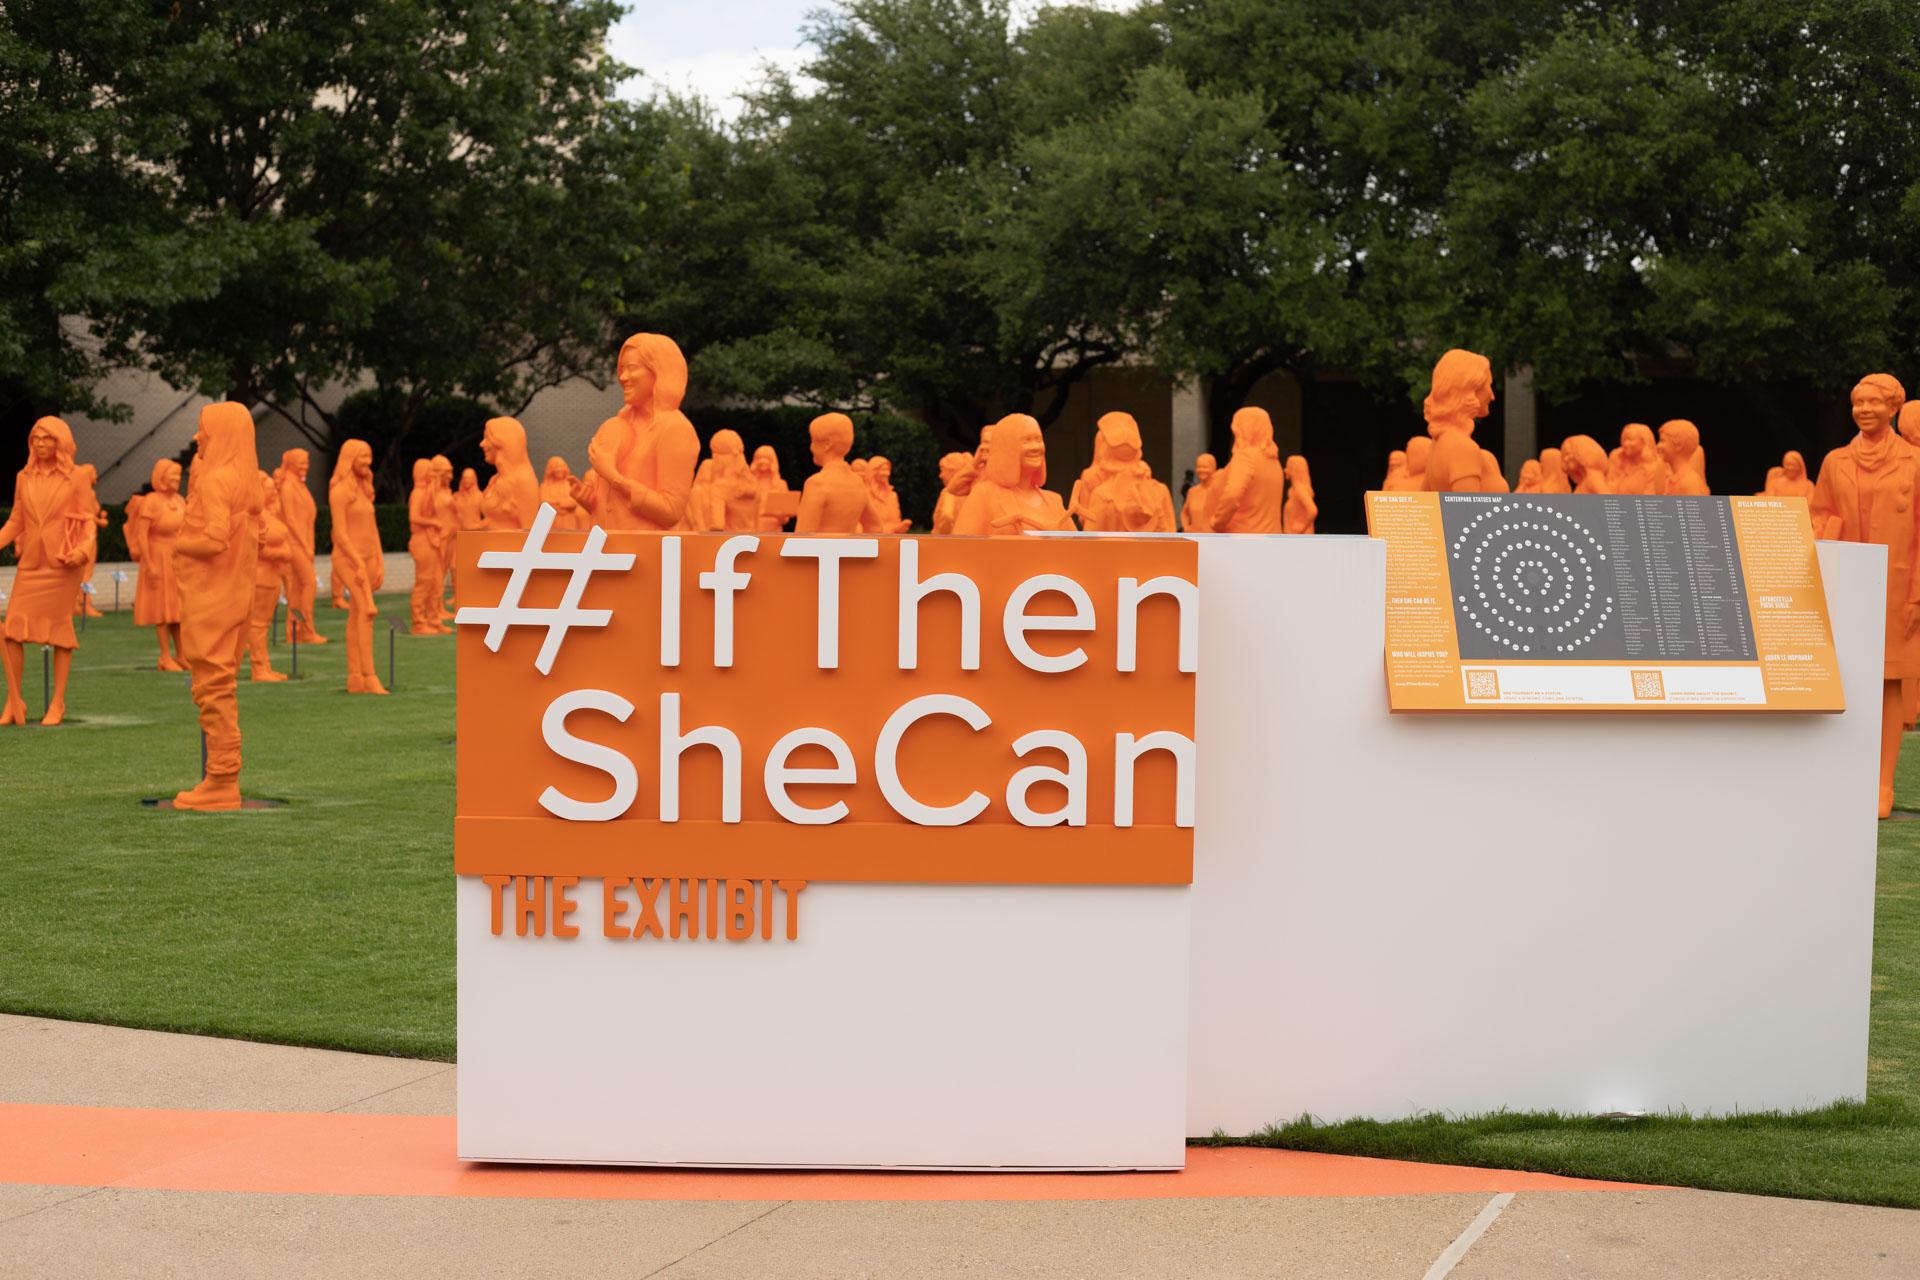 IfThenSheCan – The Exhibit” Featuring More Than 120 Female STEM Ambassadors  From Across the Country Debuts at NorthPark Center in Dallas on May 15